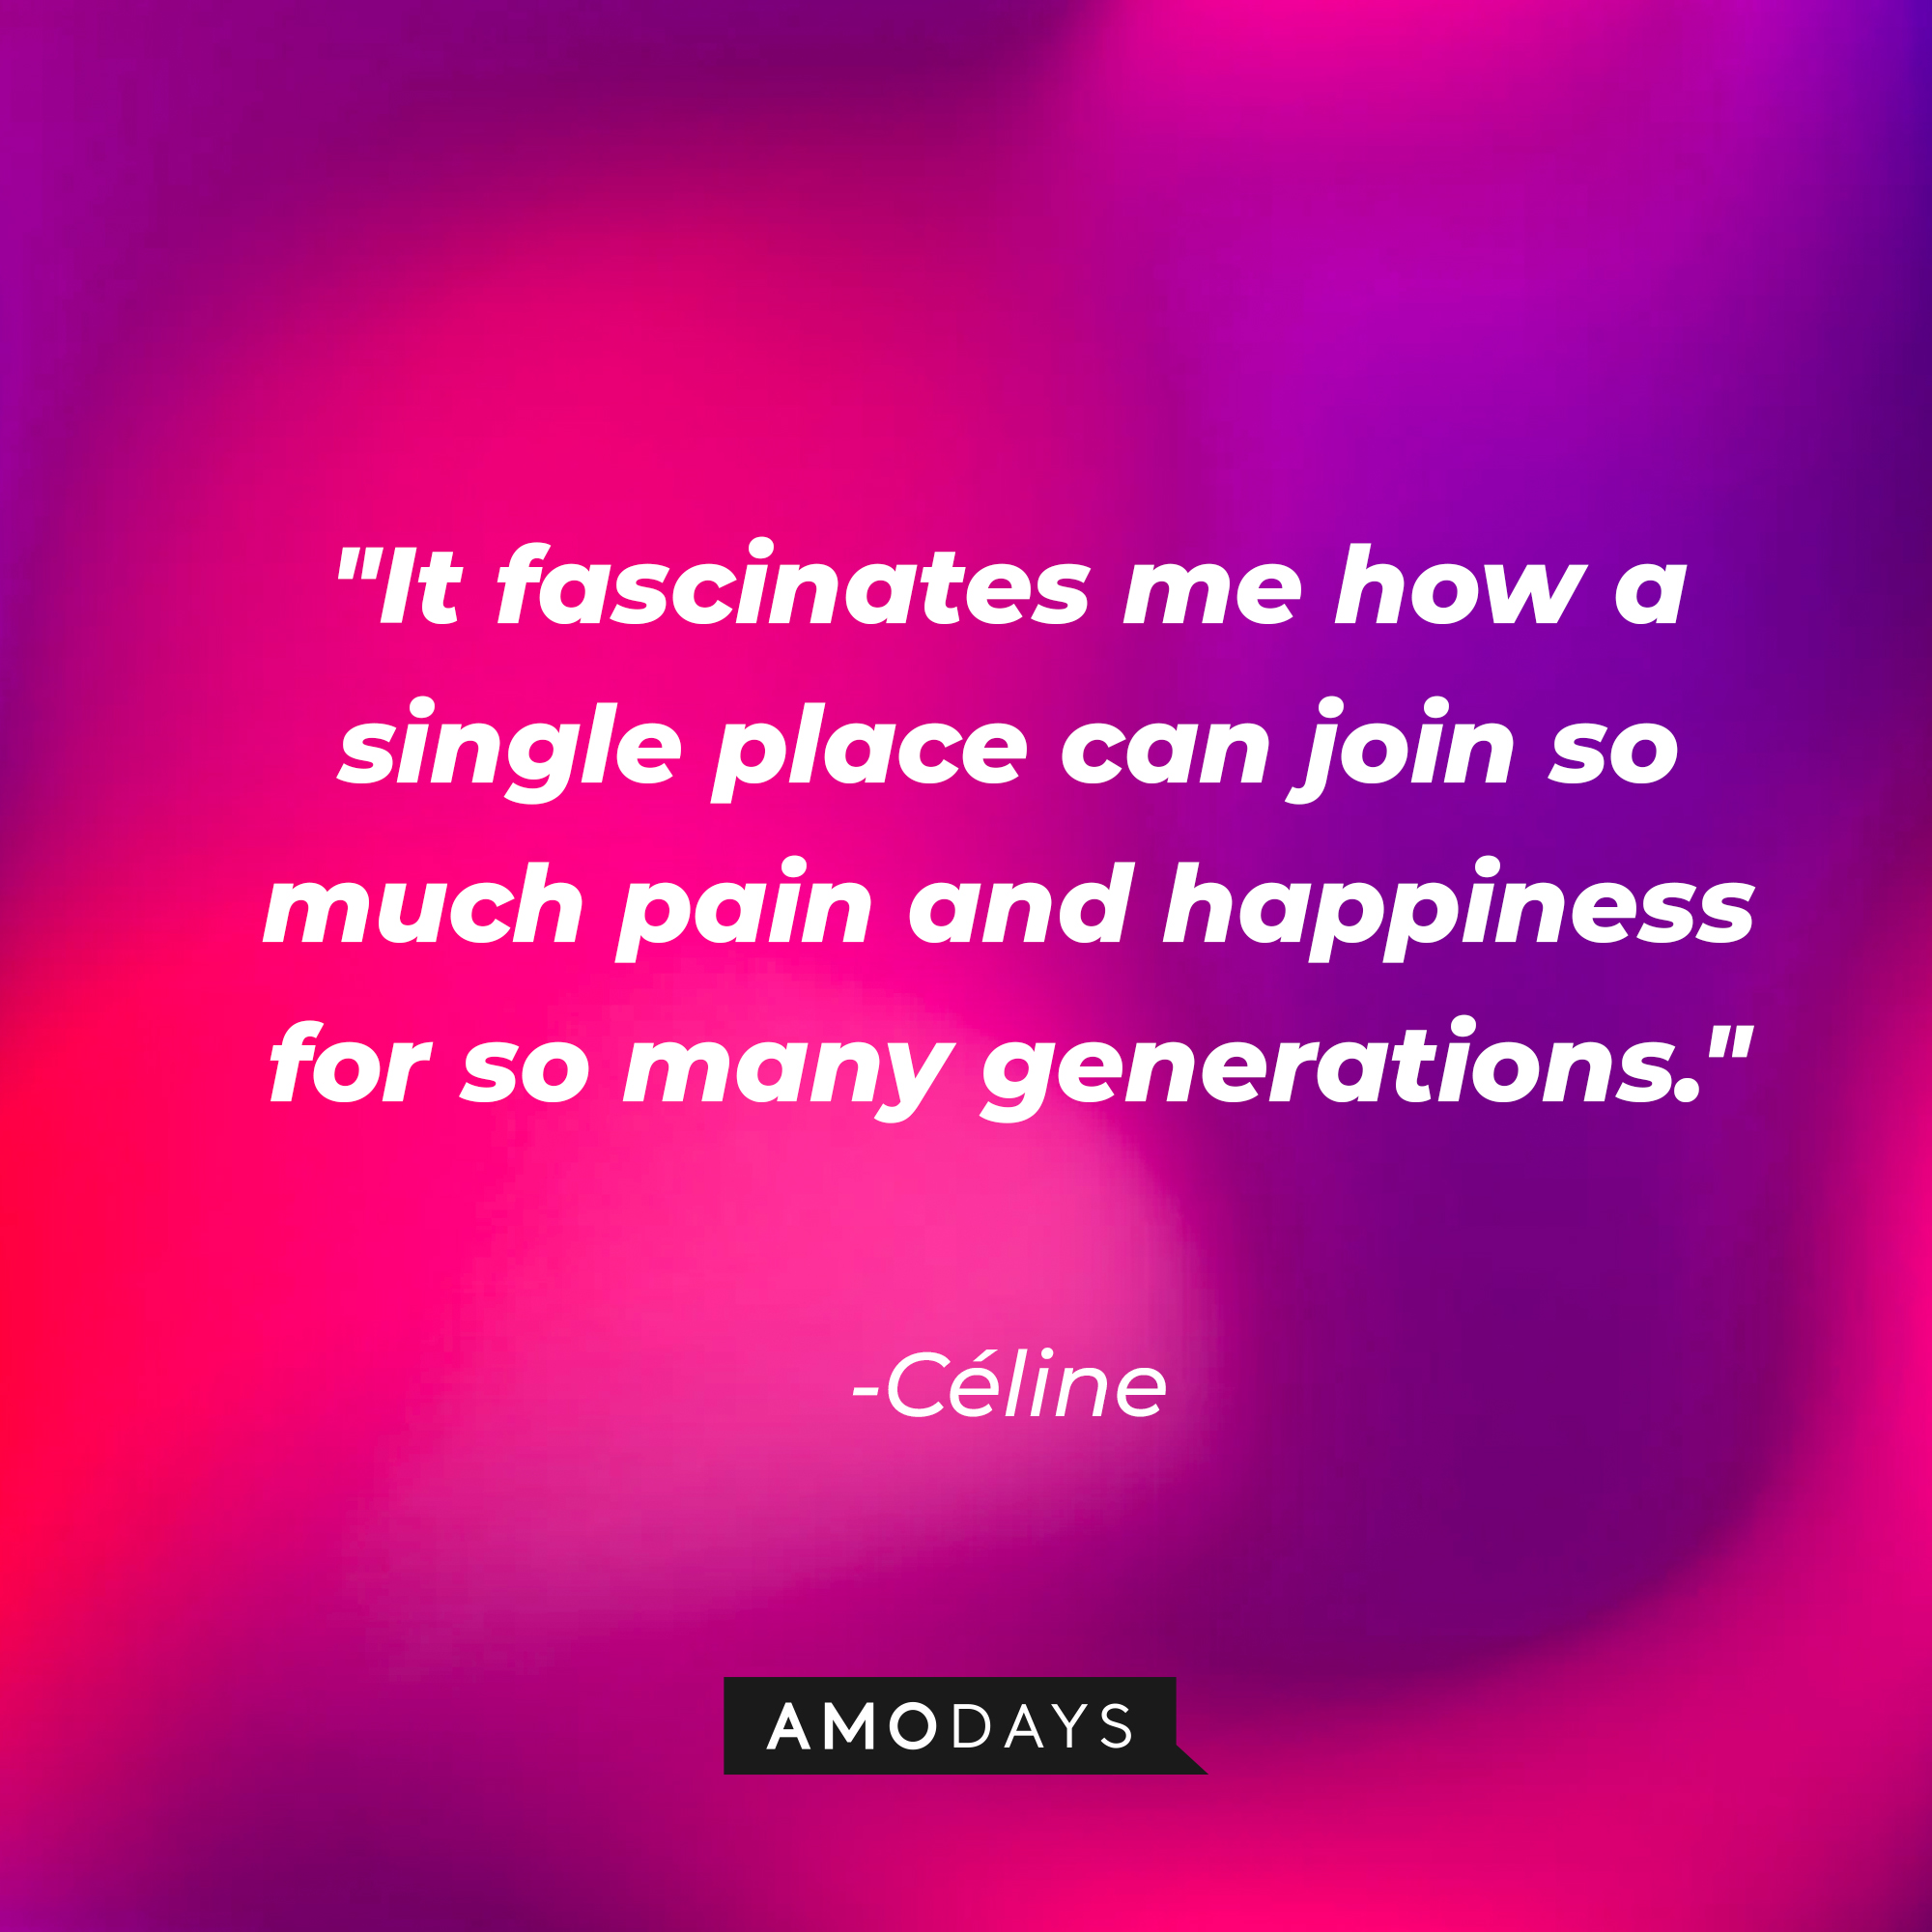 Céline's quote: "It fascinates me how a single place can join so much pain and happiness for so many generations." | Source: AmoDays